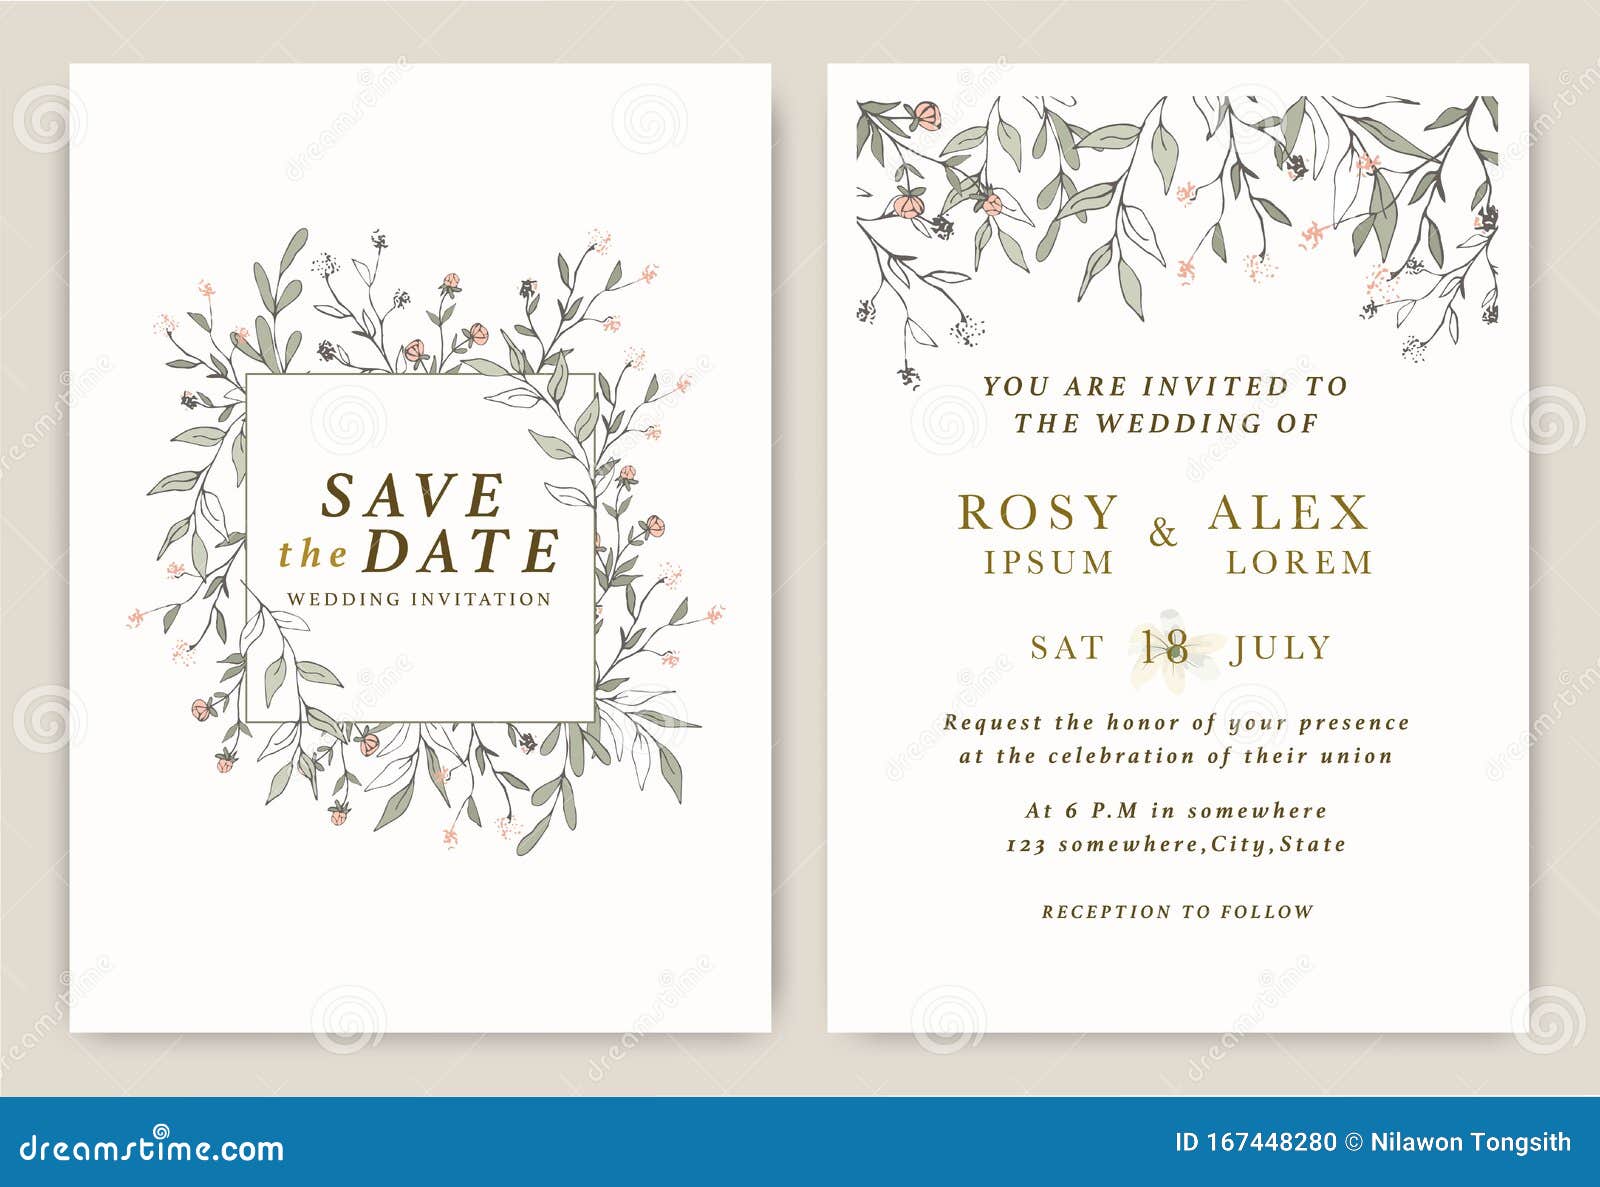 wedding invitations save the date card with elegant garden anemone